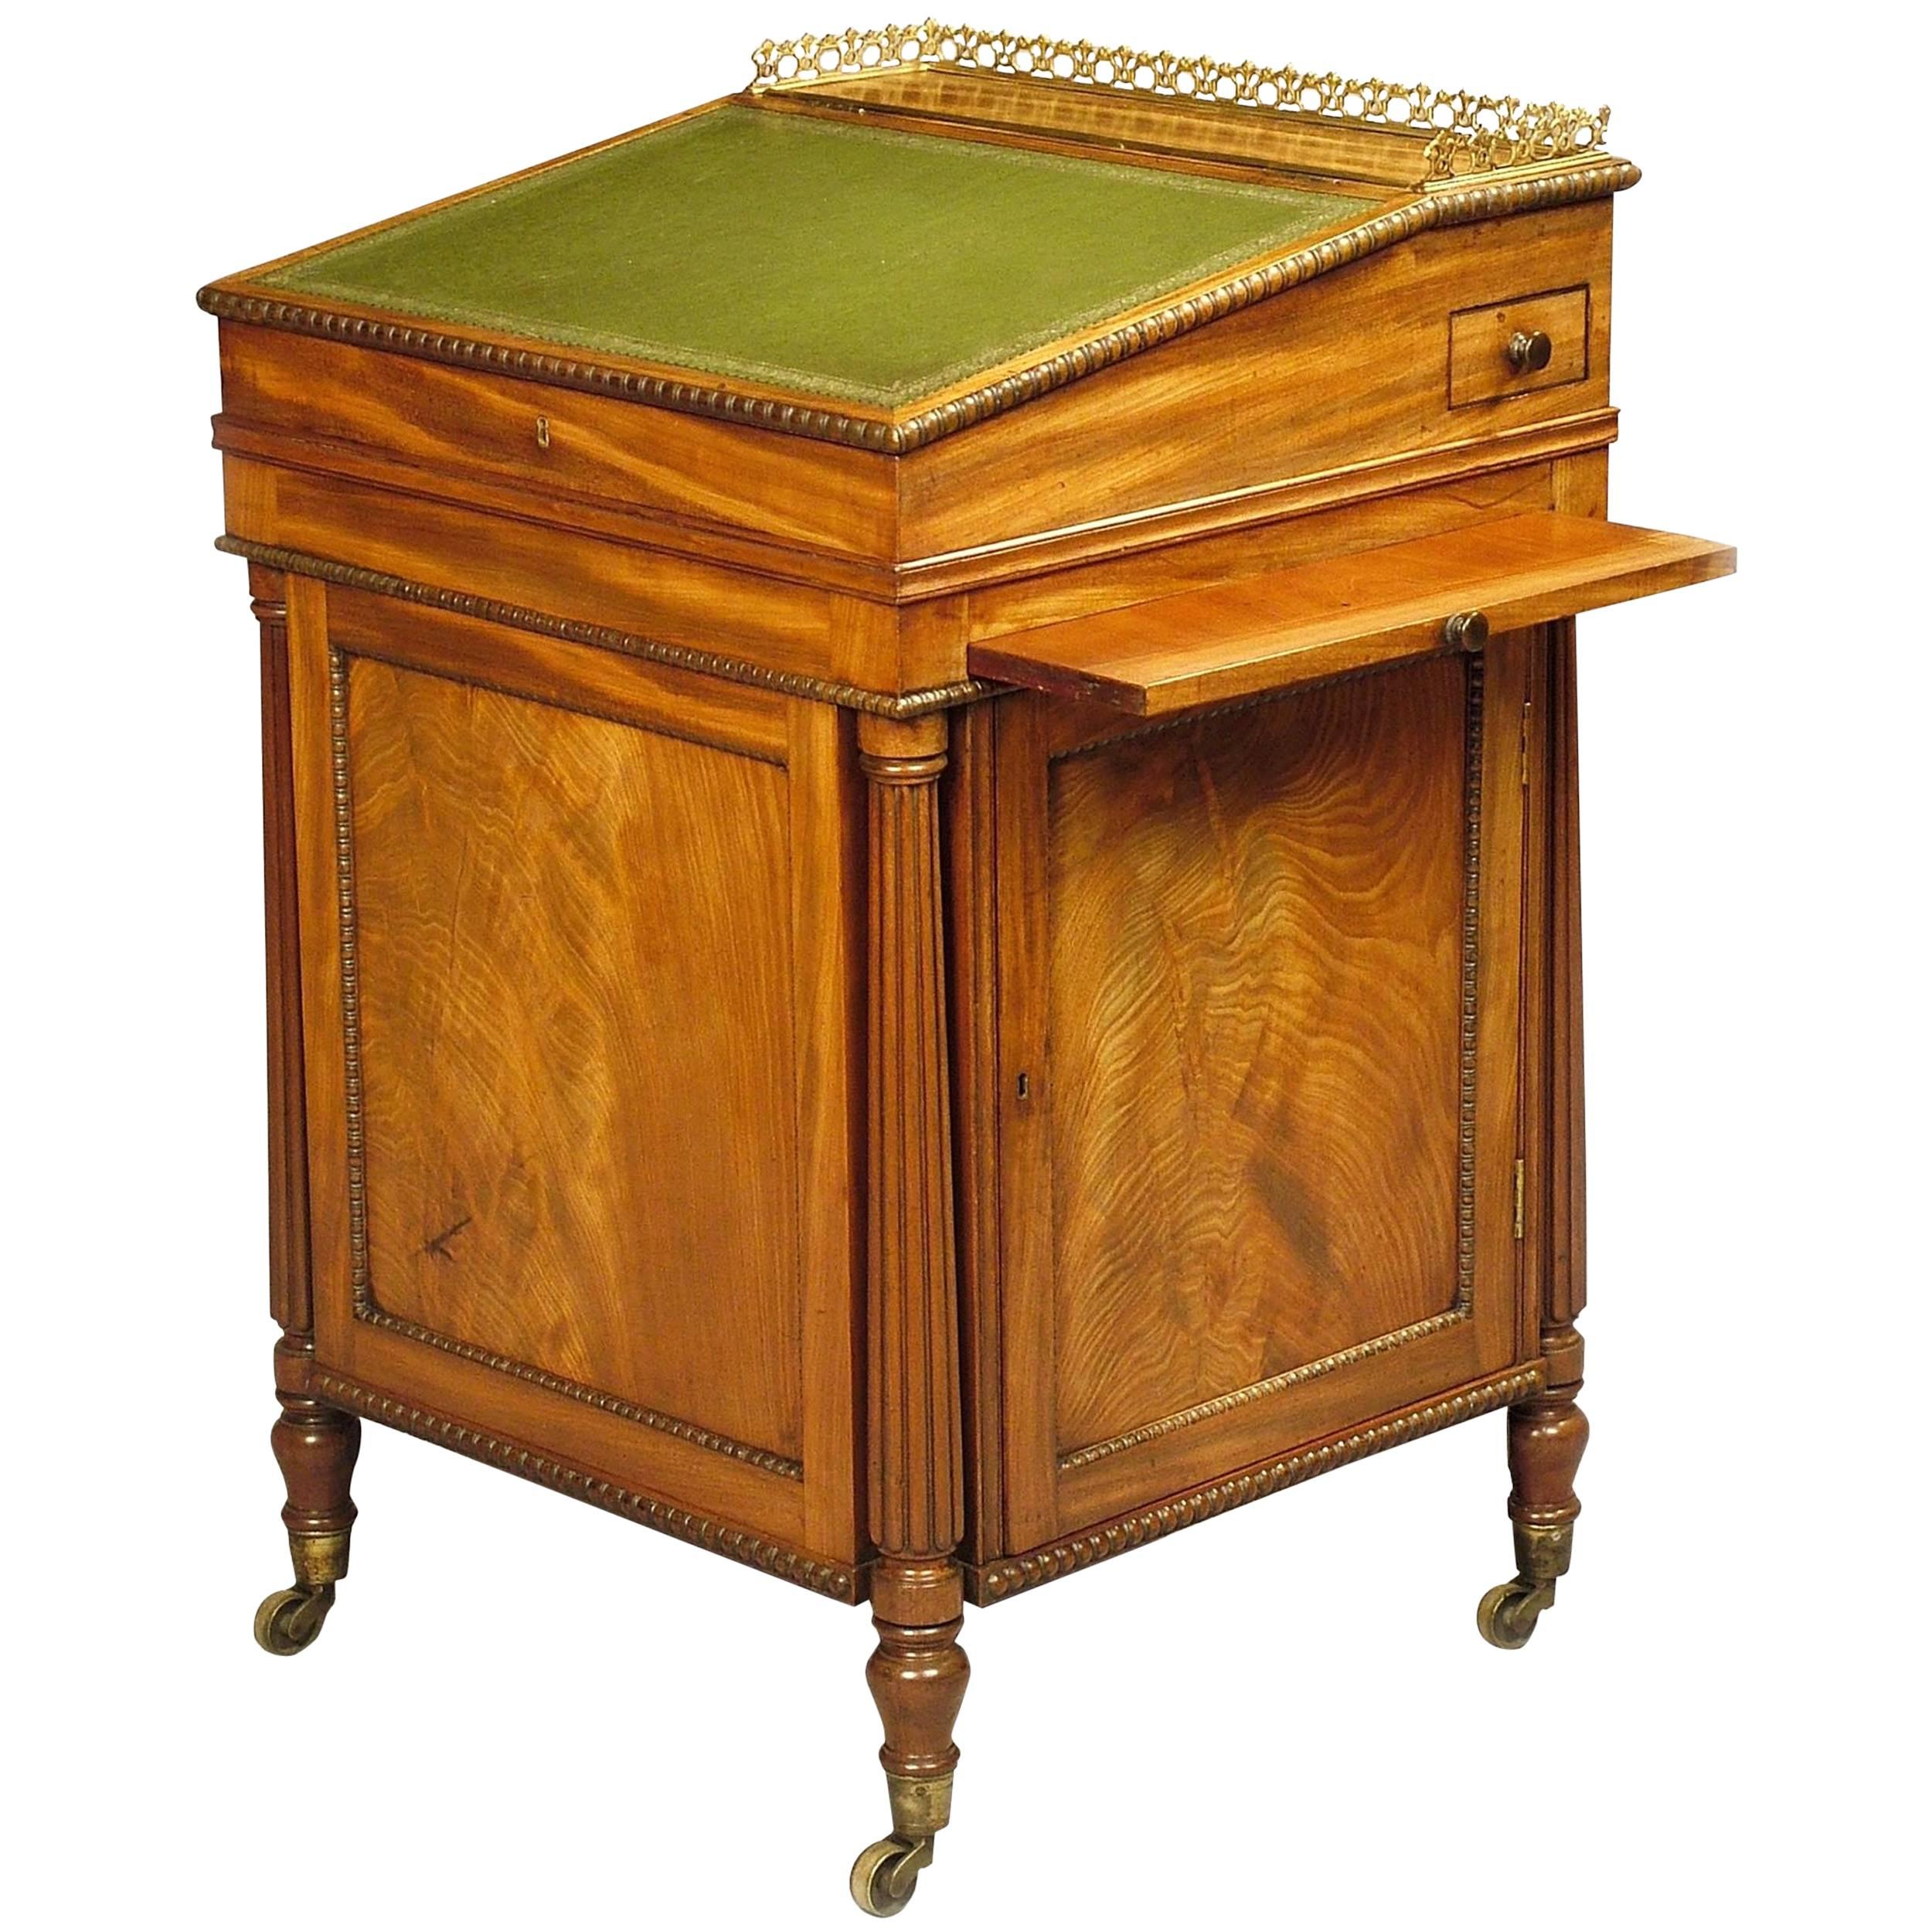 Georgian Period Mahogany Davenport Desk with Green Leather Writing Surface